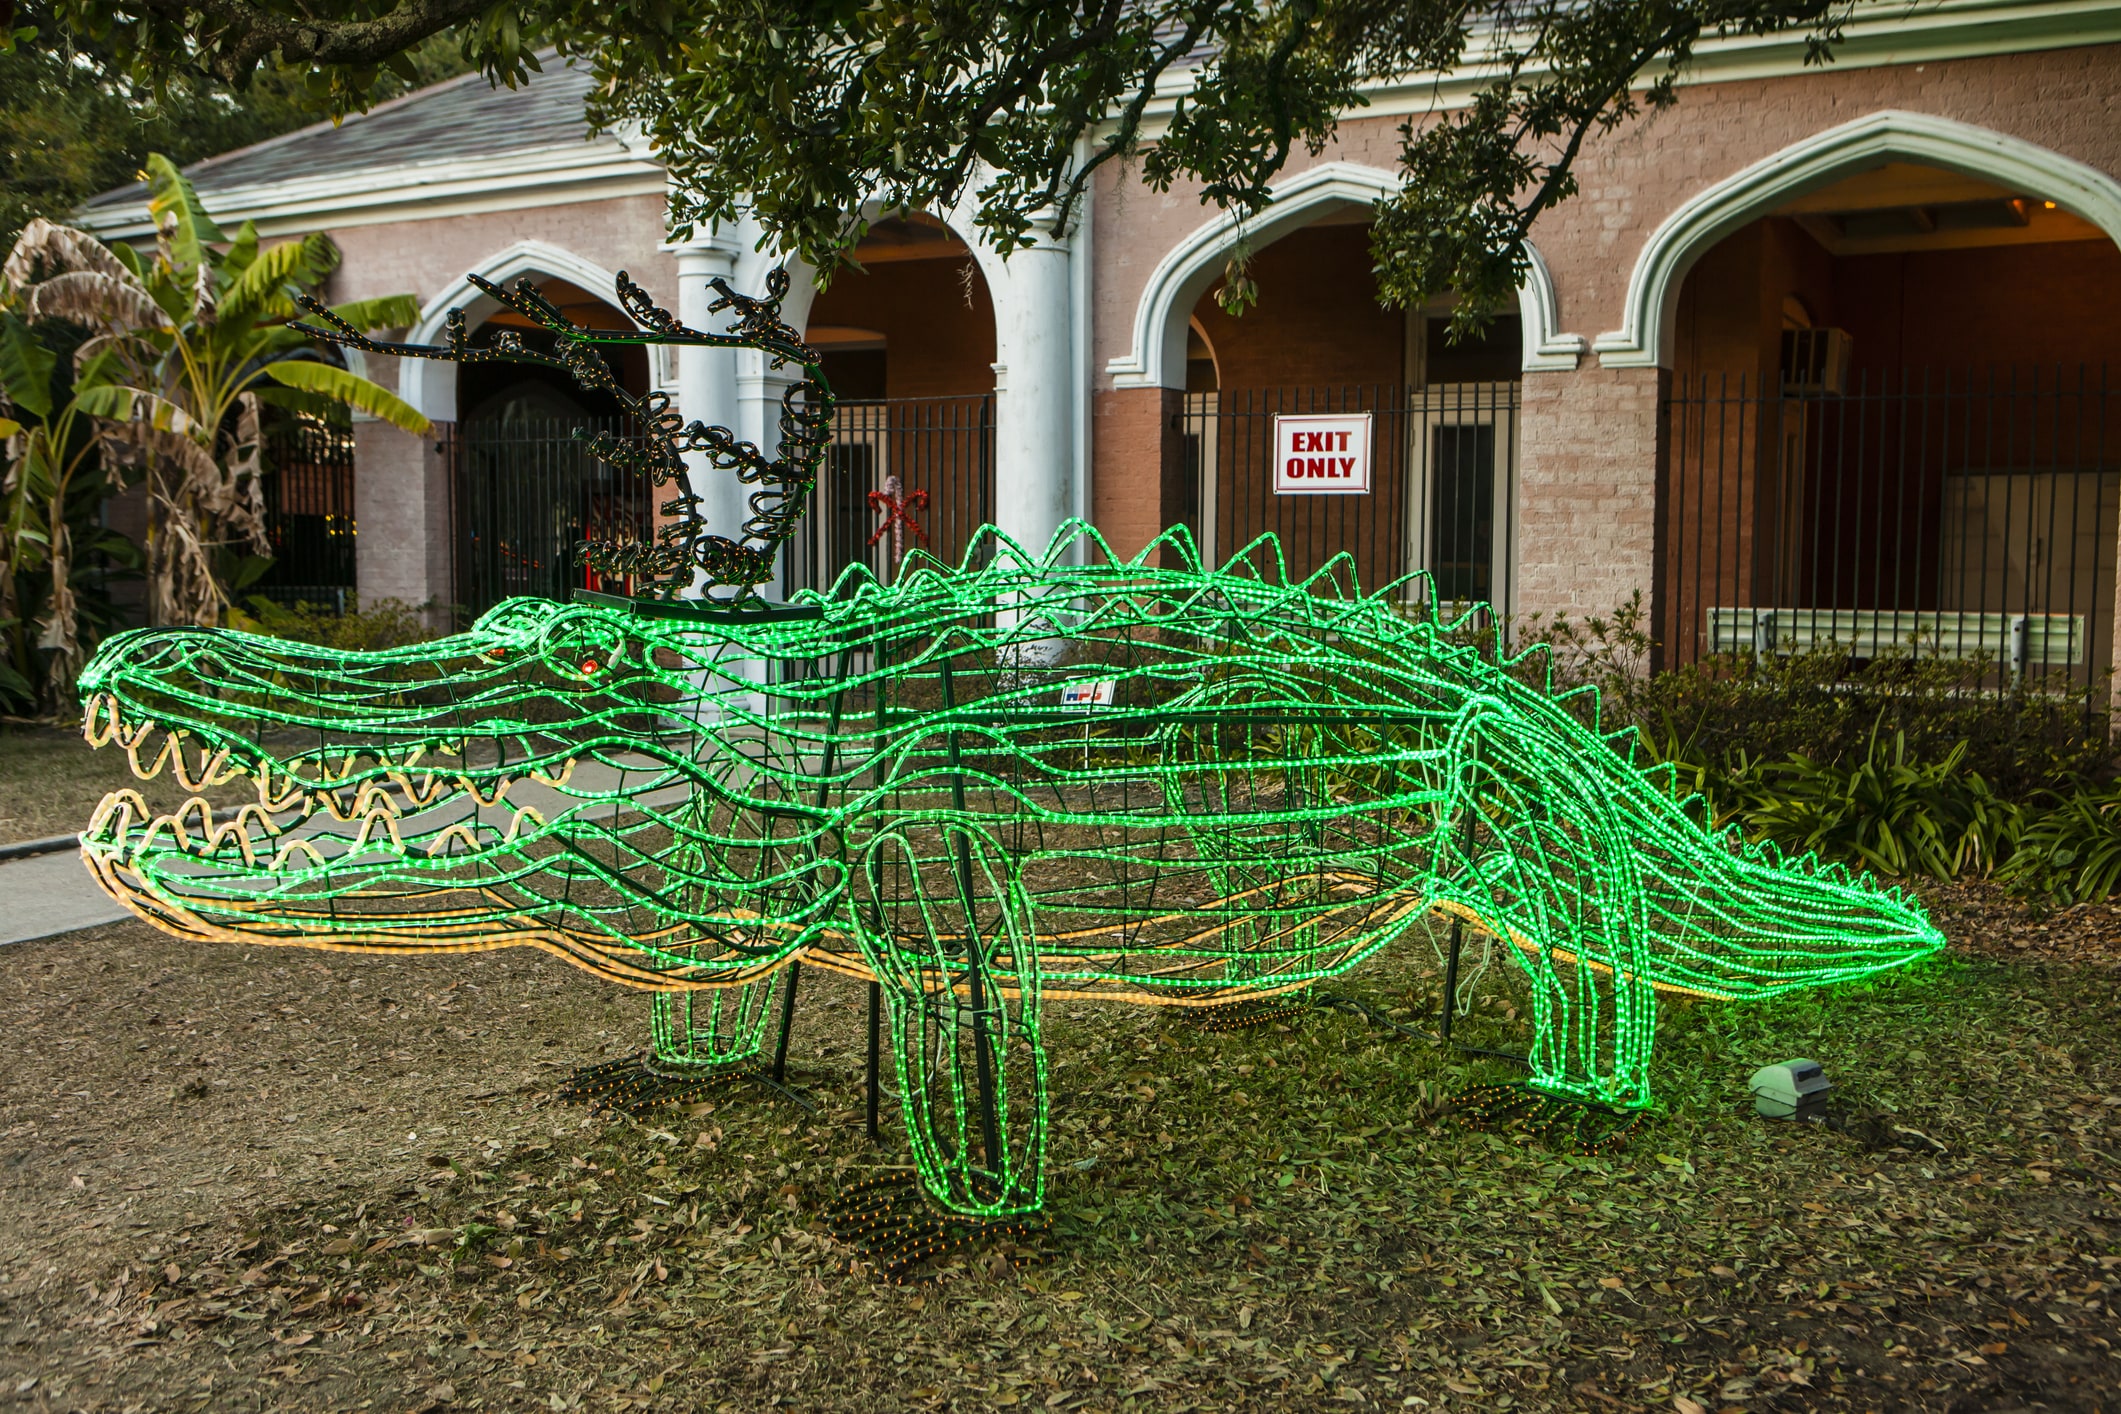 A Green Alligator made of lights for the Christmas light display at City Park, New Orleans.